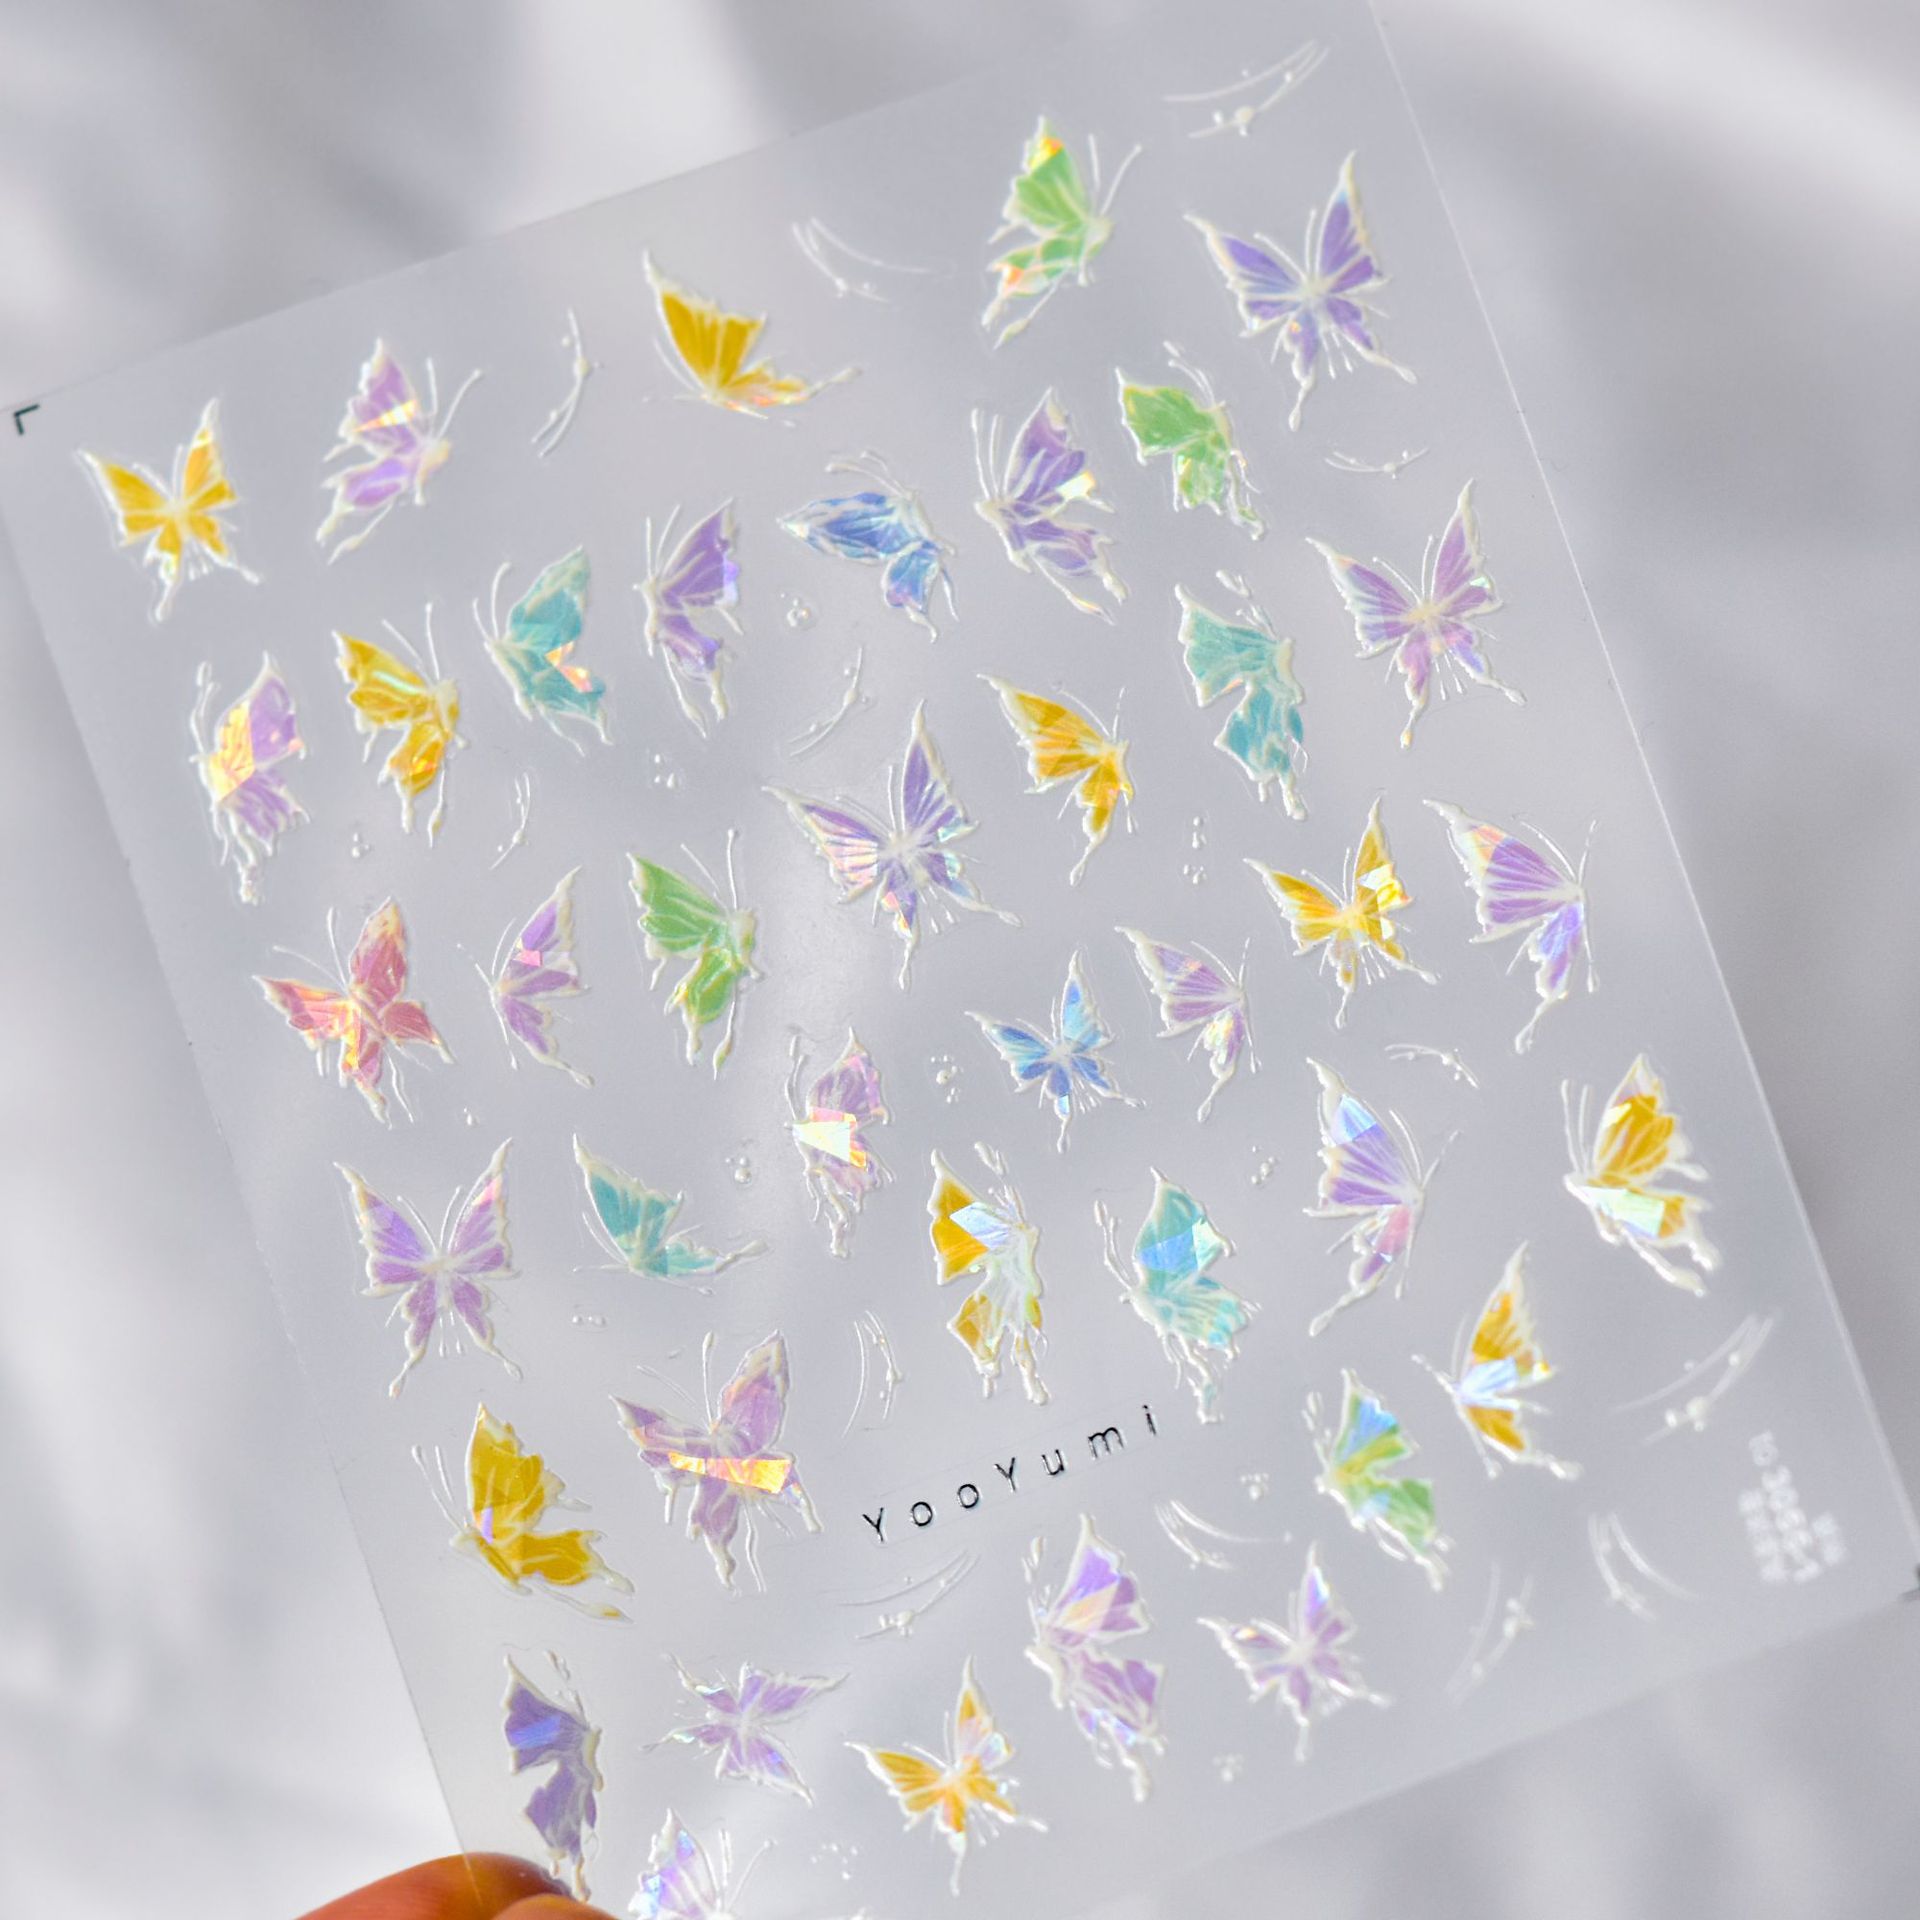 Tomoni Shell Light 3041 Dudu Cooperation Adhesive Nail Stickers Japanese Stickers 5D Nail Sticker Paper Butterfly